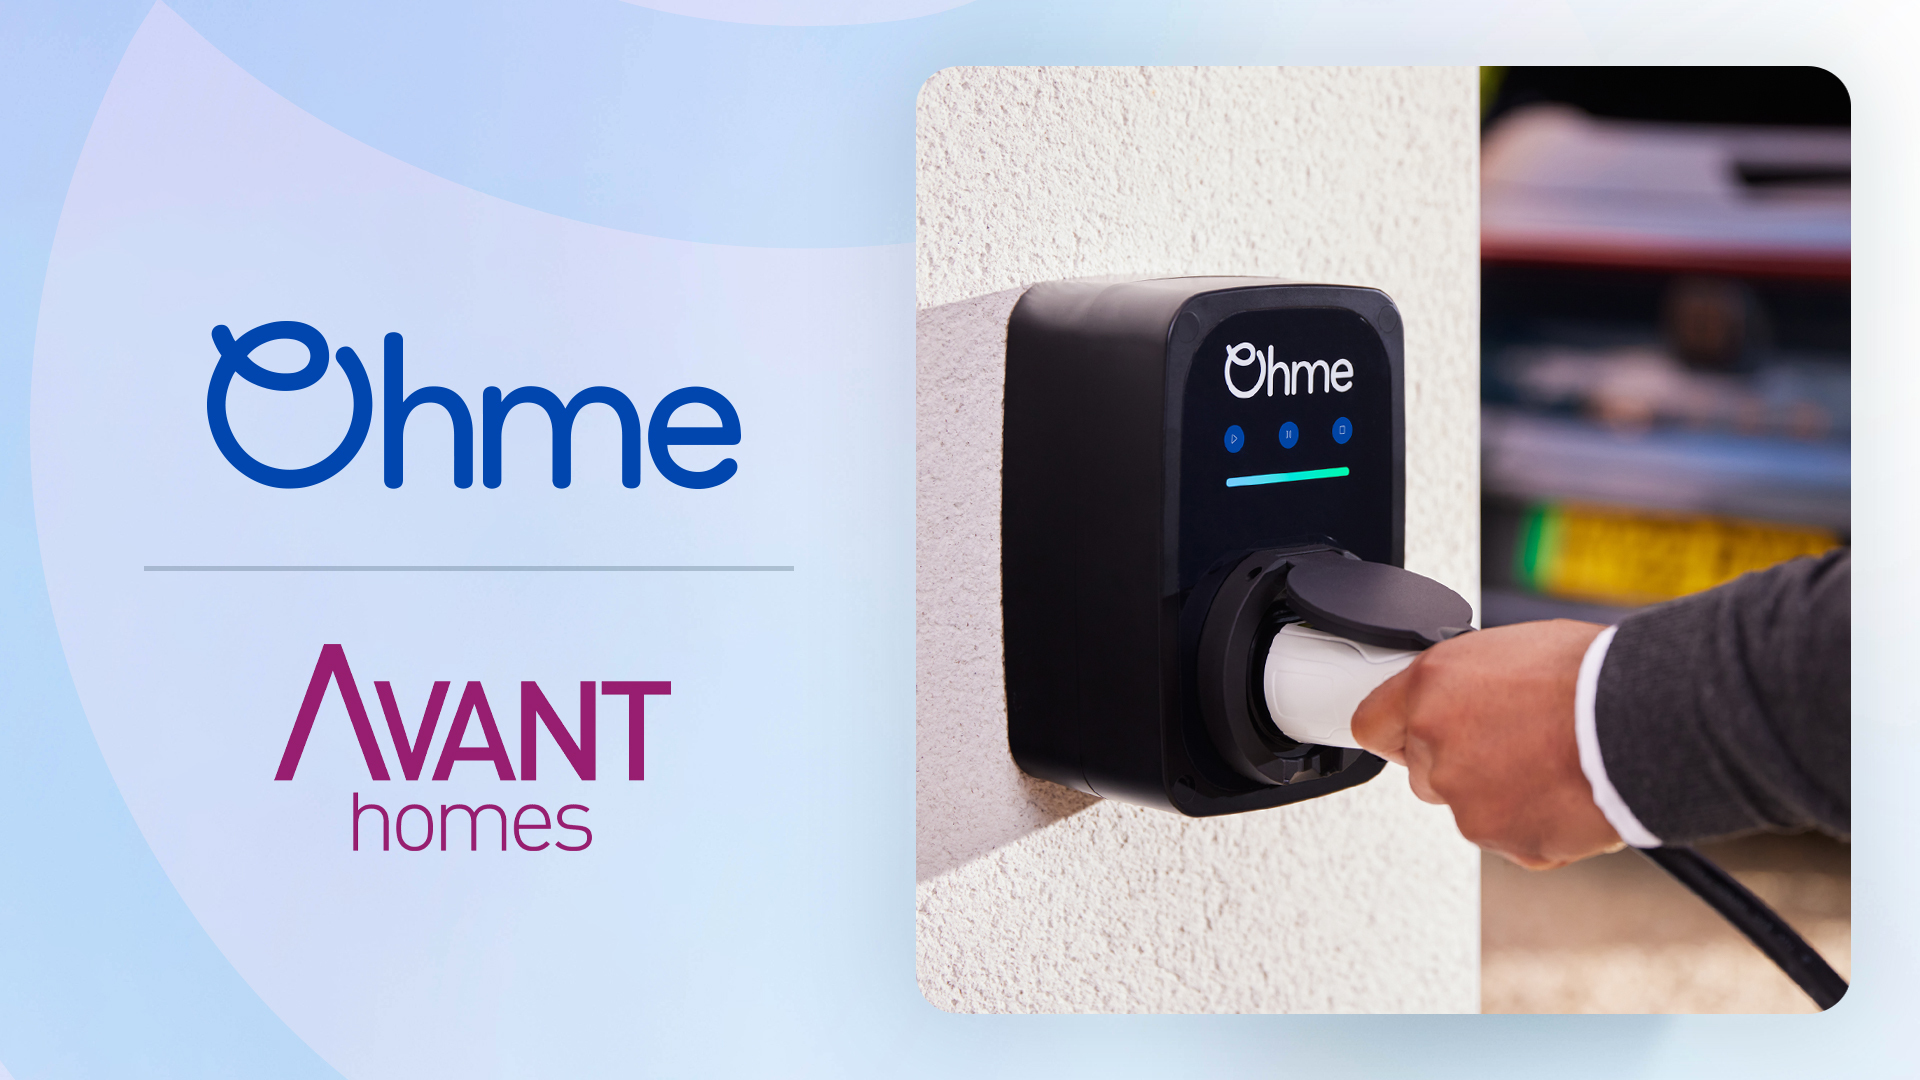 Ohme and Avant Homes logos and ePod EV charger